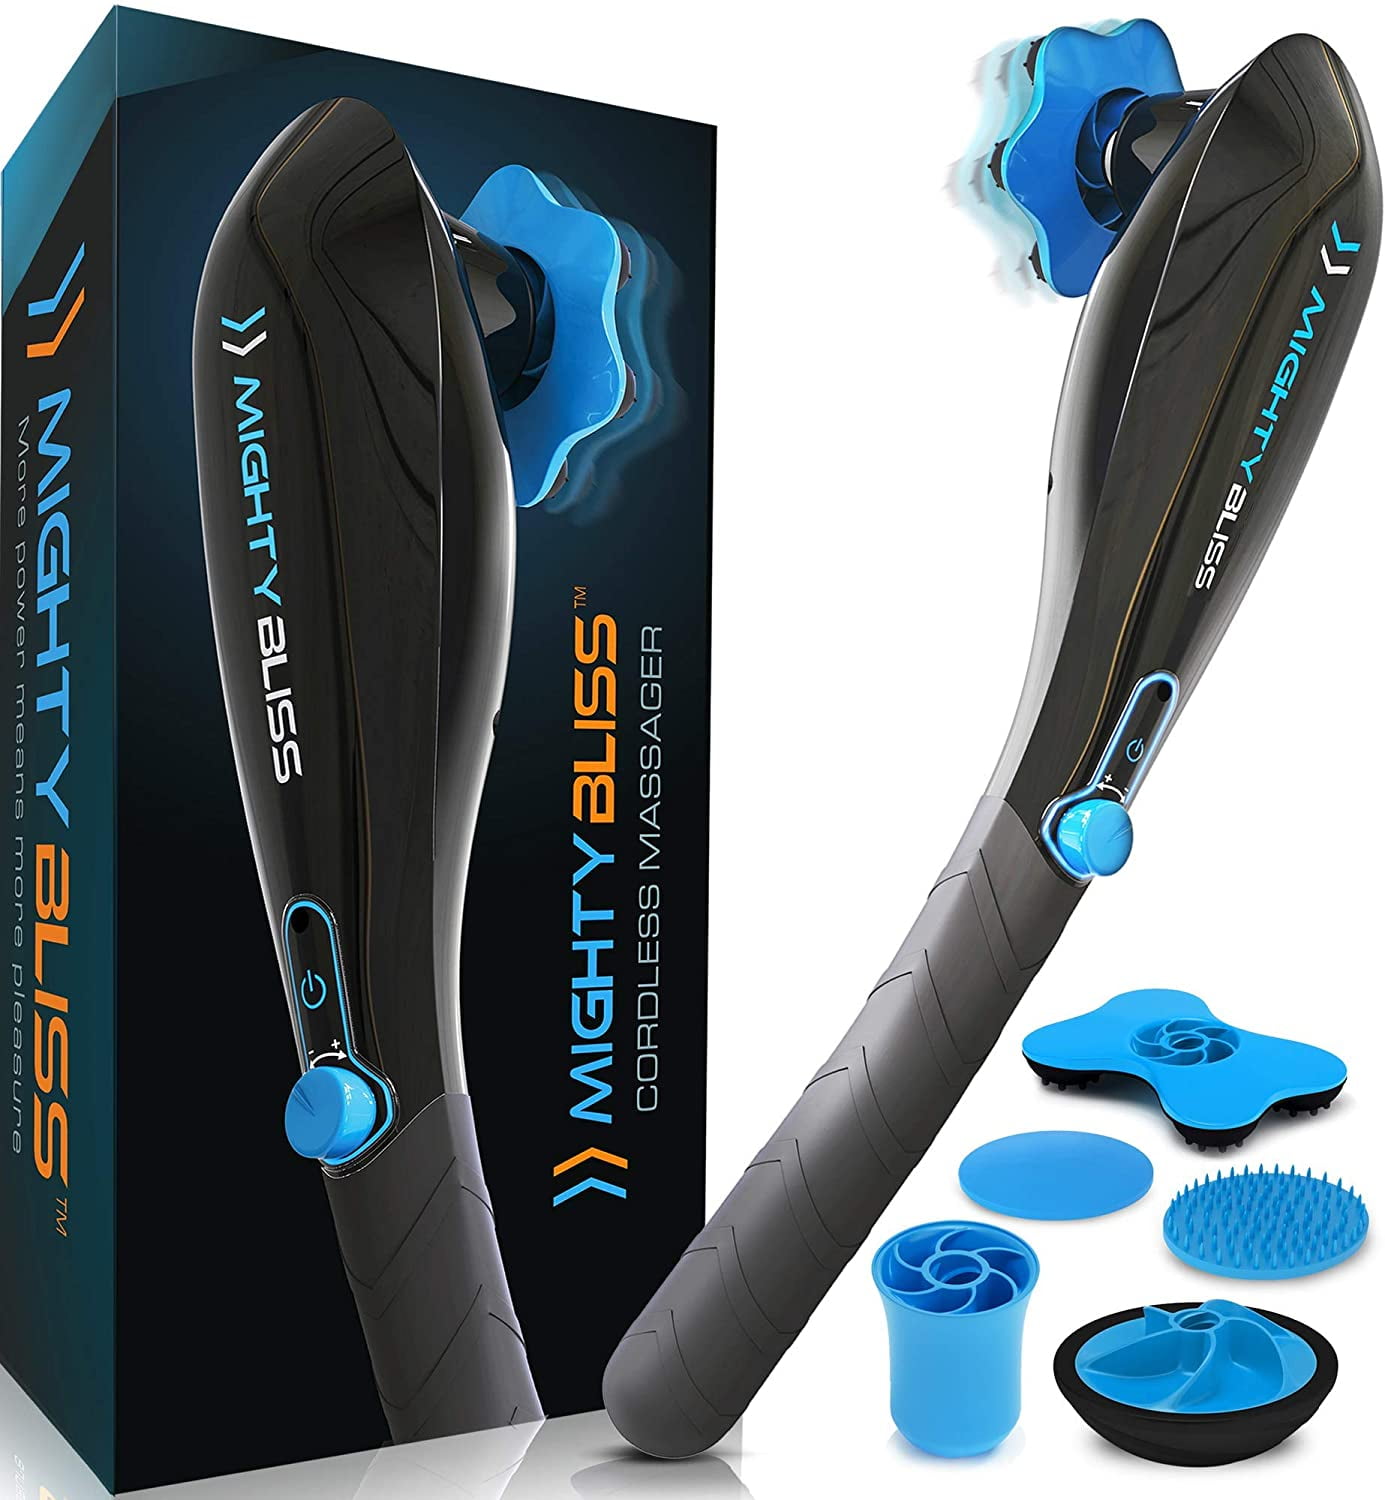 Mighty Bliss Deep Tissue Back and Body Massager Cordless Electric Handheld  Percussion Muscle Hand Ma…See more Mighty Bliss Deep Tissue Back and Body